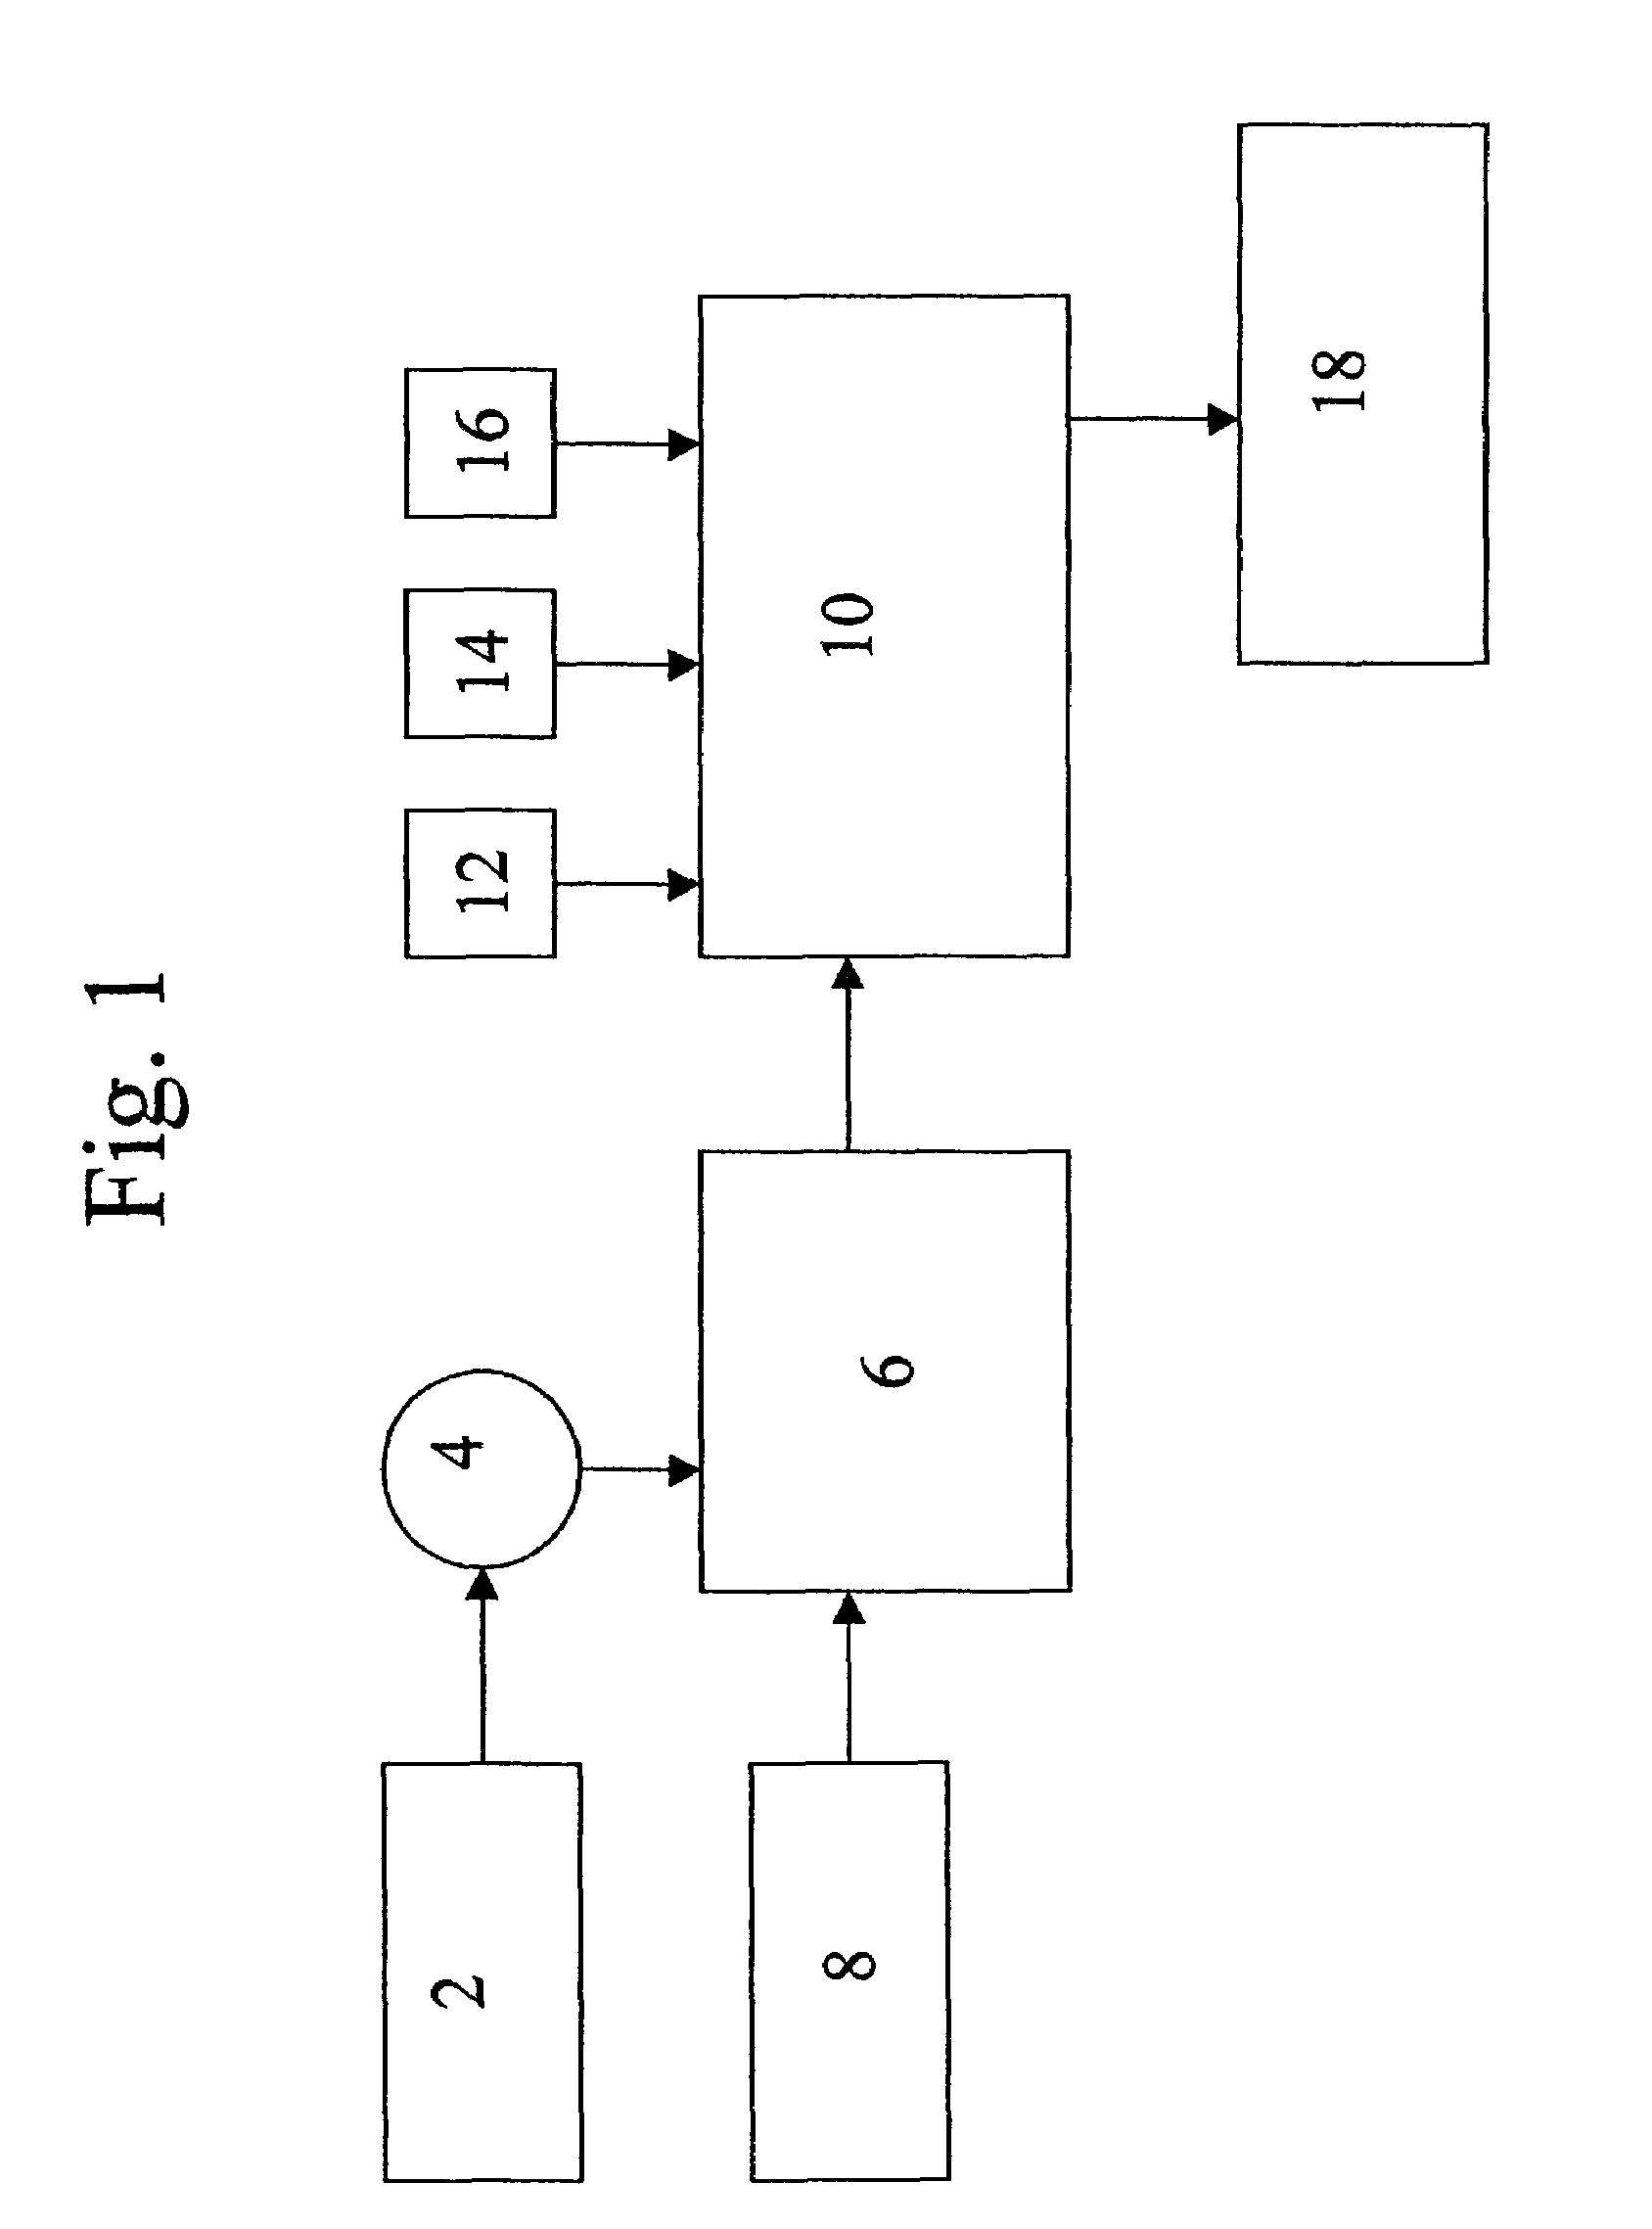 System and method for on-line mixing and application of surface coating compositions for food products